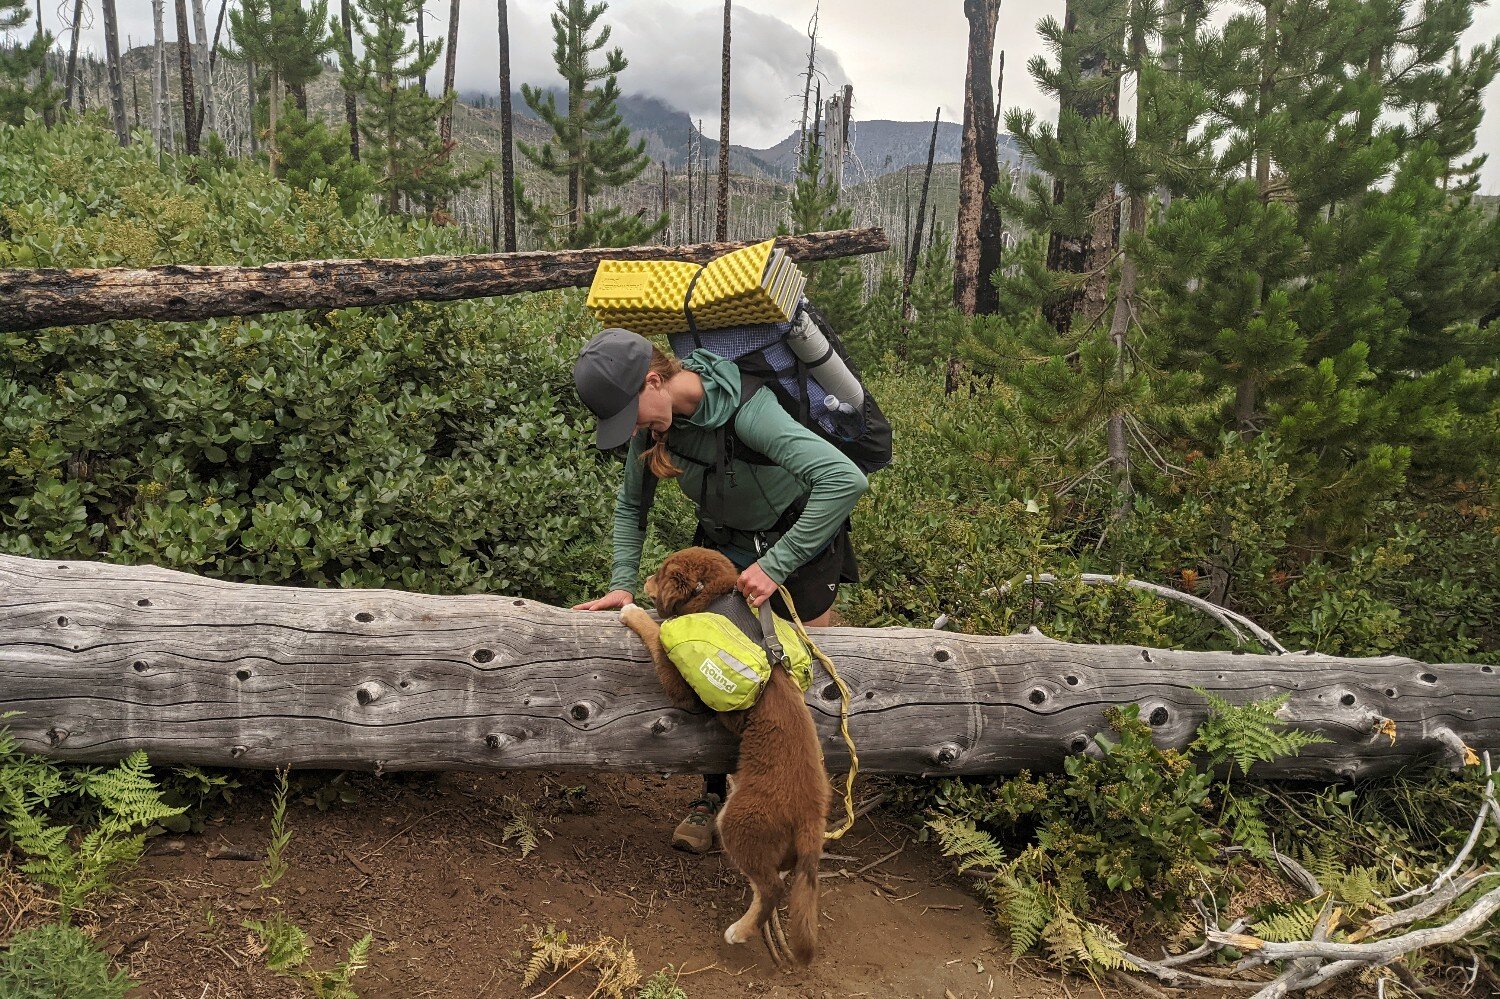 The handle on dog backpacks can be used to assist your dog over obstacles on the trail